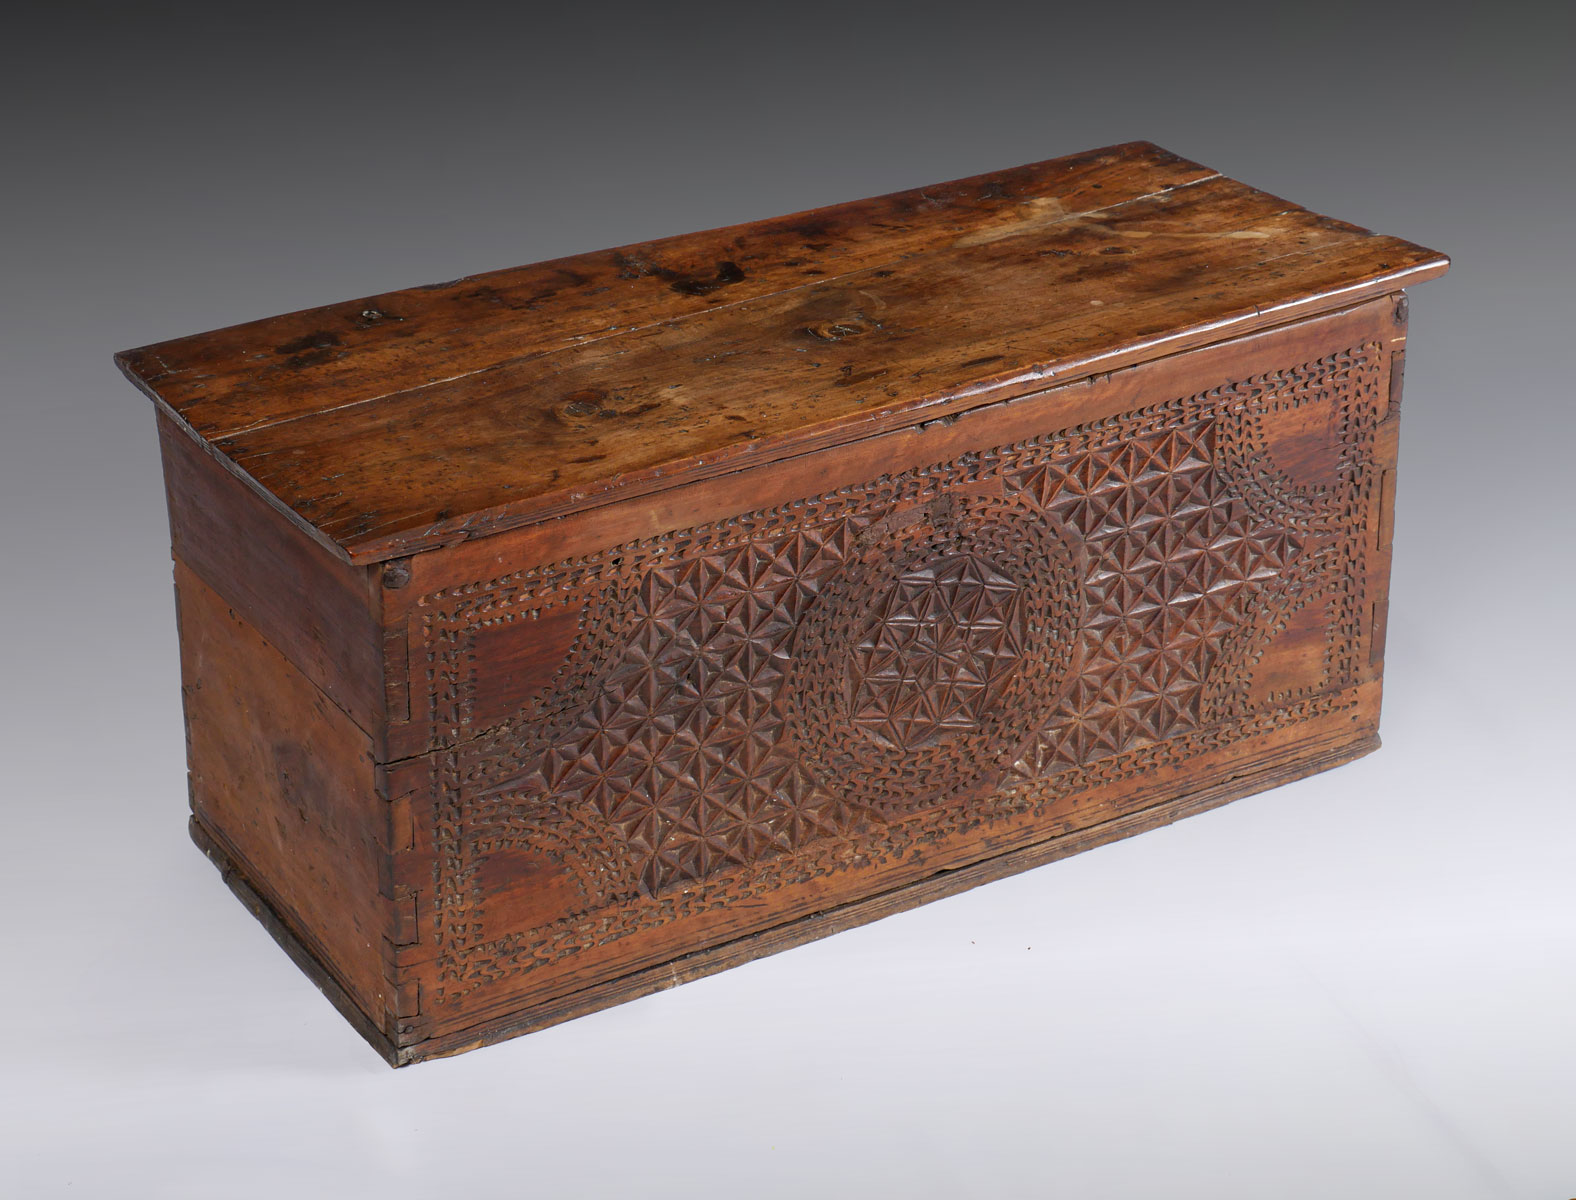 EARLY CARVED SYRIAN TRUNK: Old